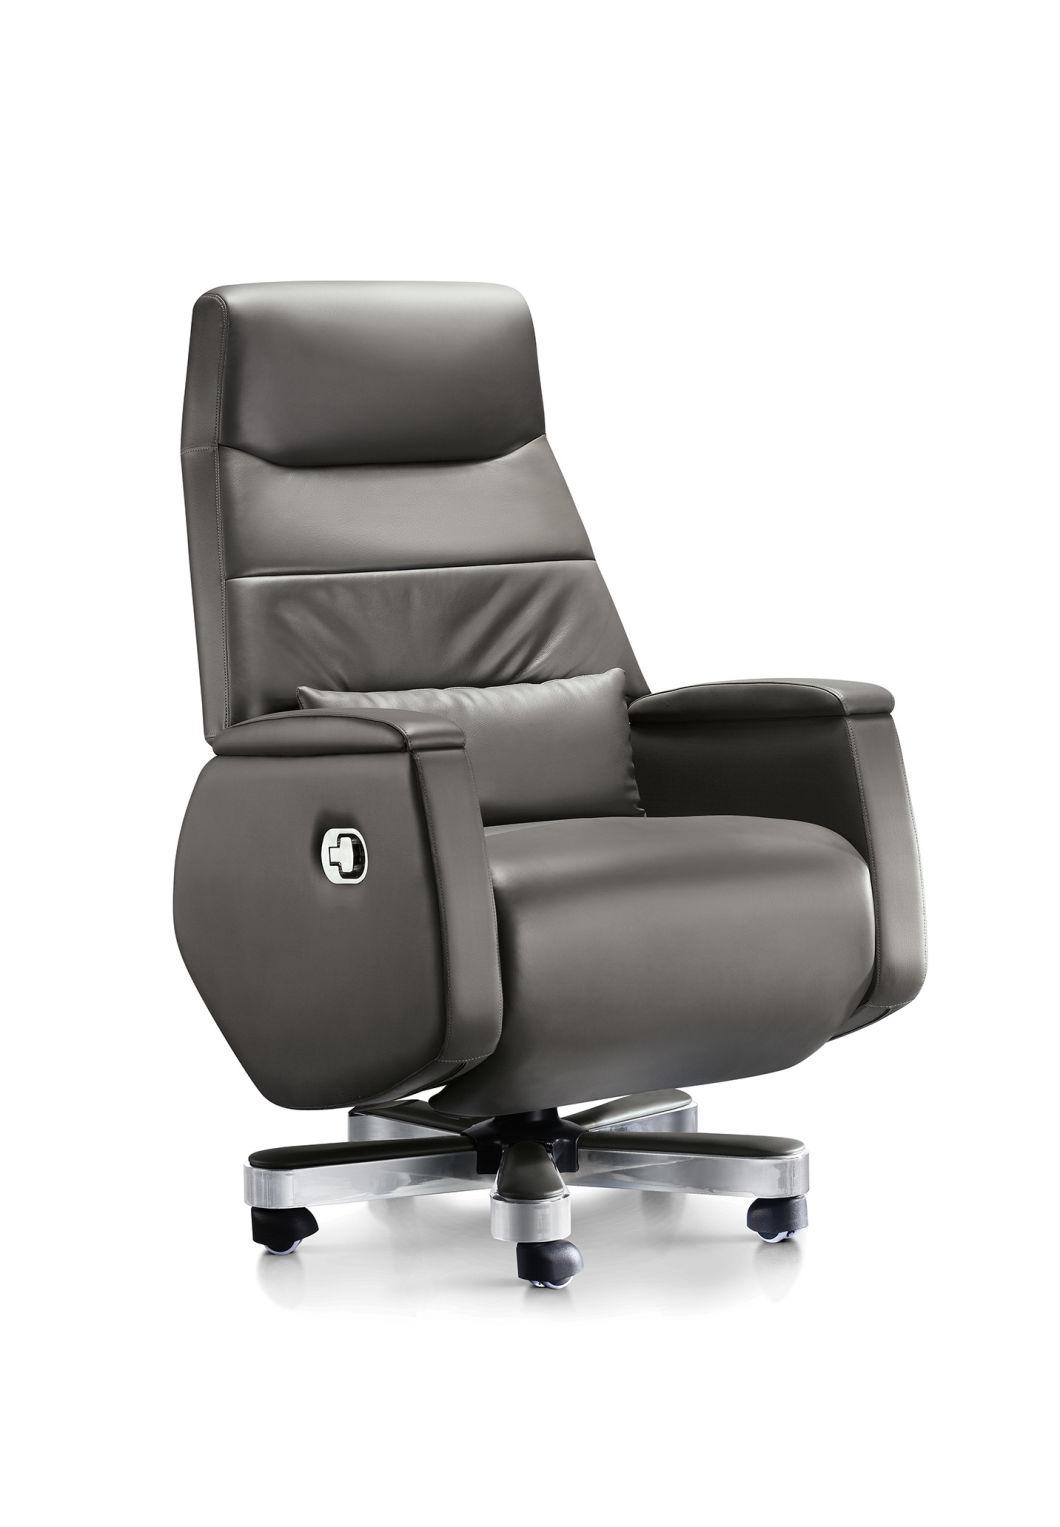 Luxury Big Size Office Boss Chair Leather Rotary Chair